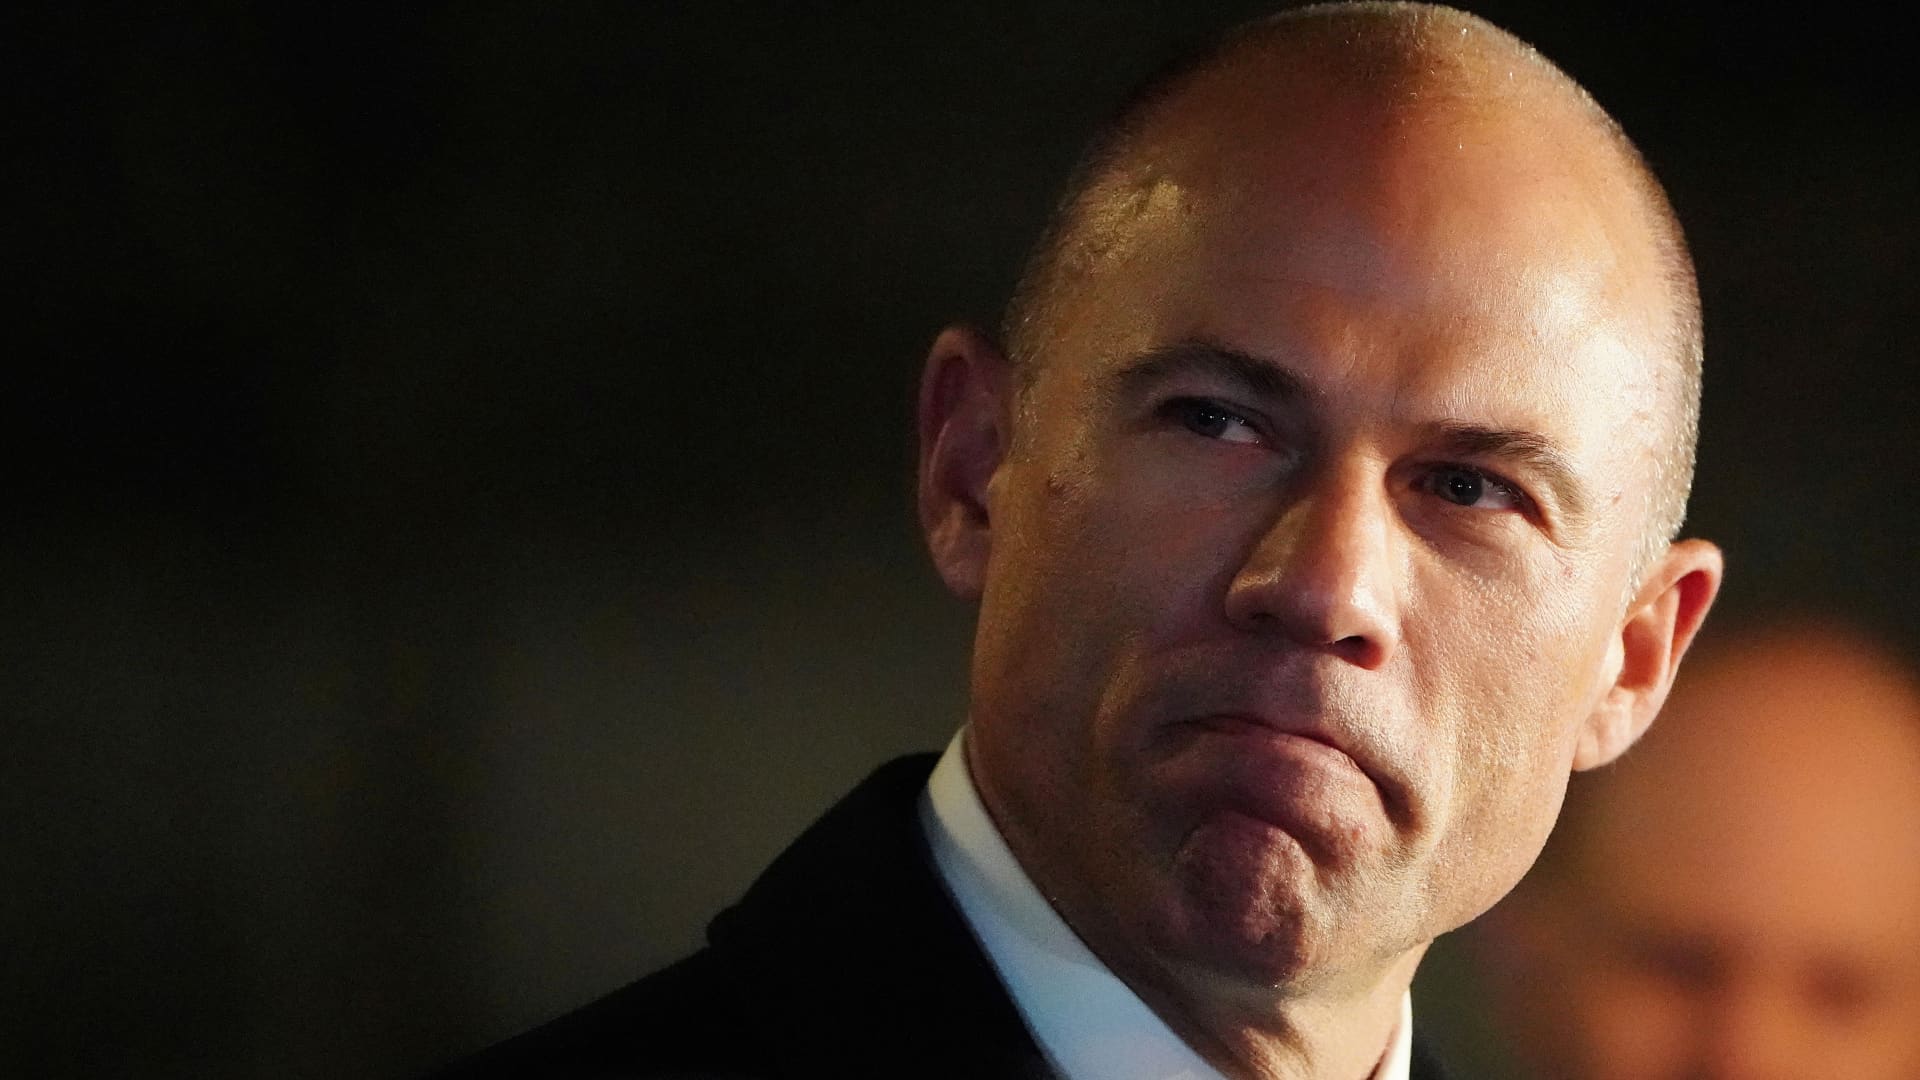 Trump foe Michael Avenatti sentenced to 14 years in prison for stealing millions from clients